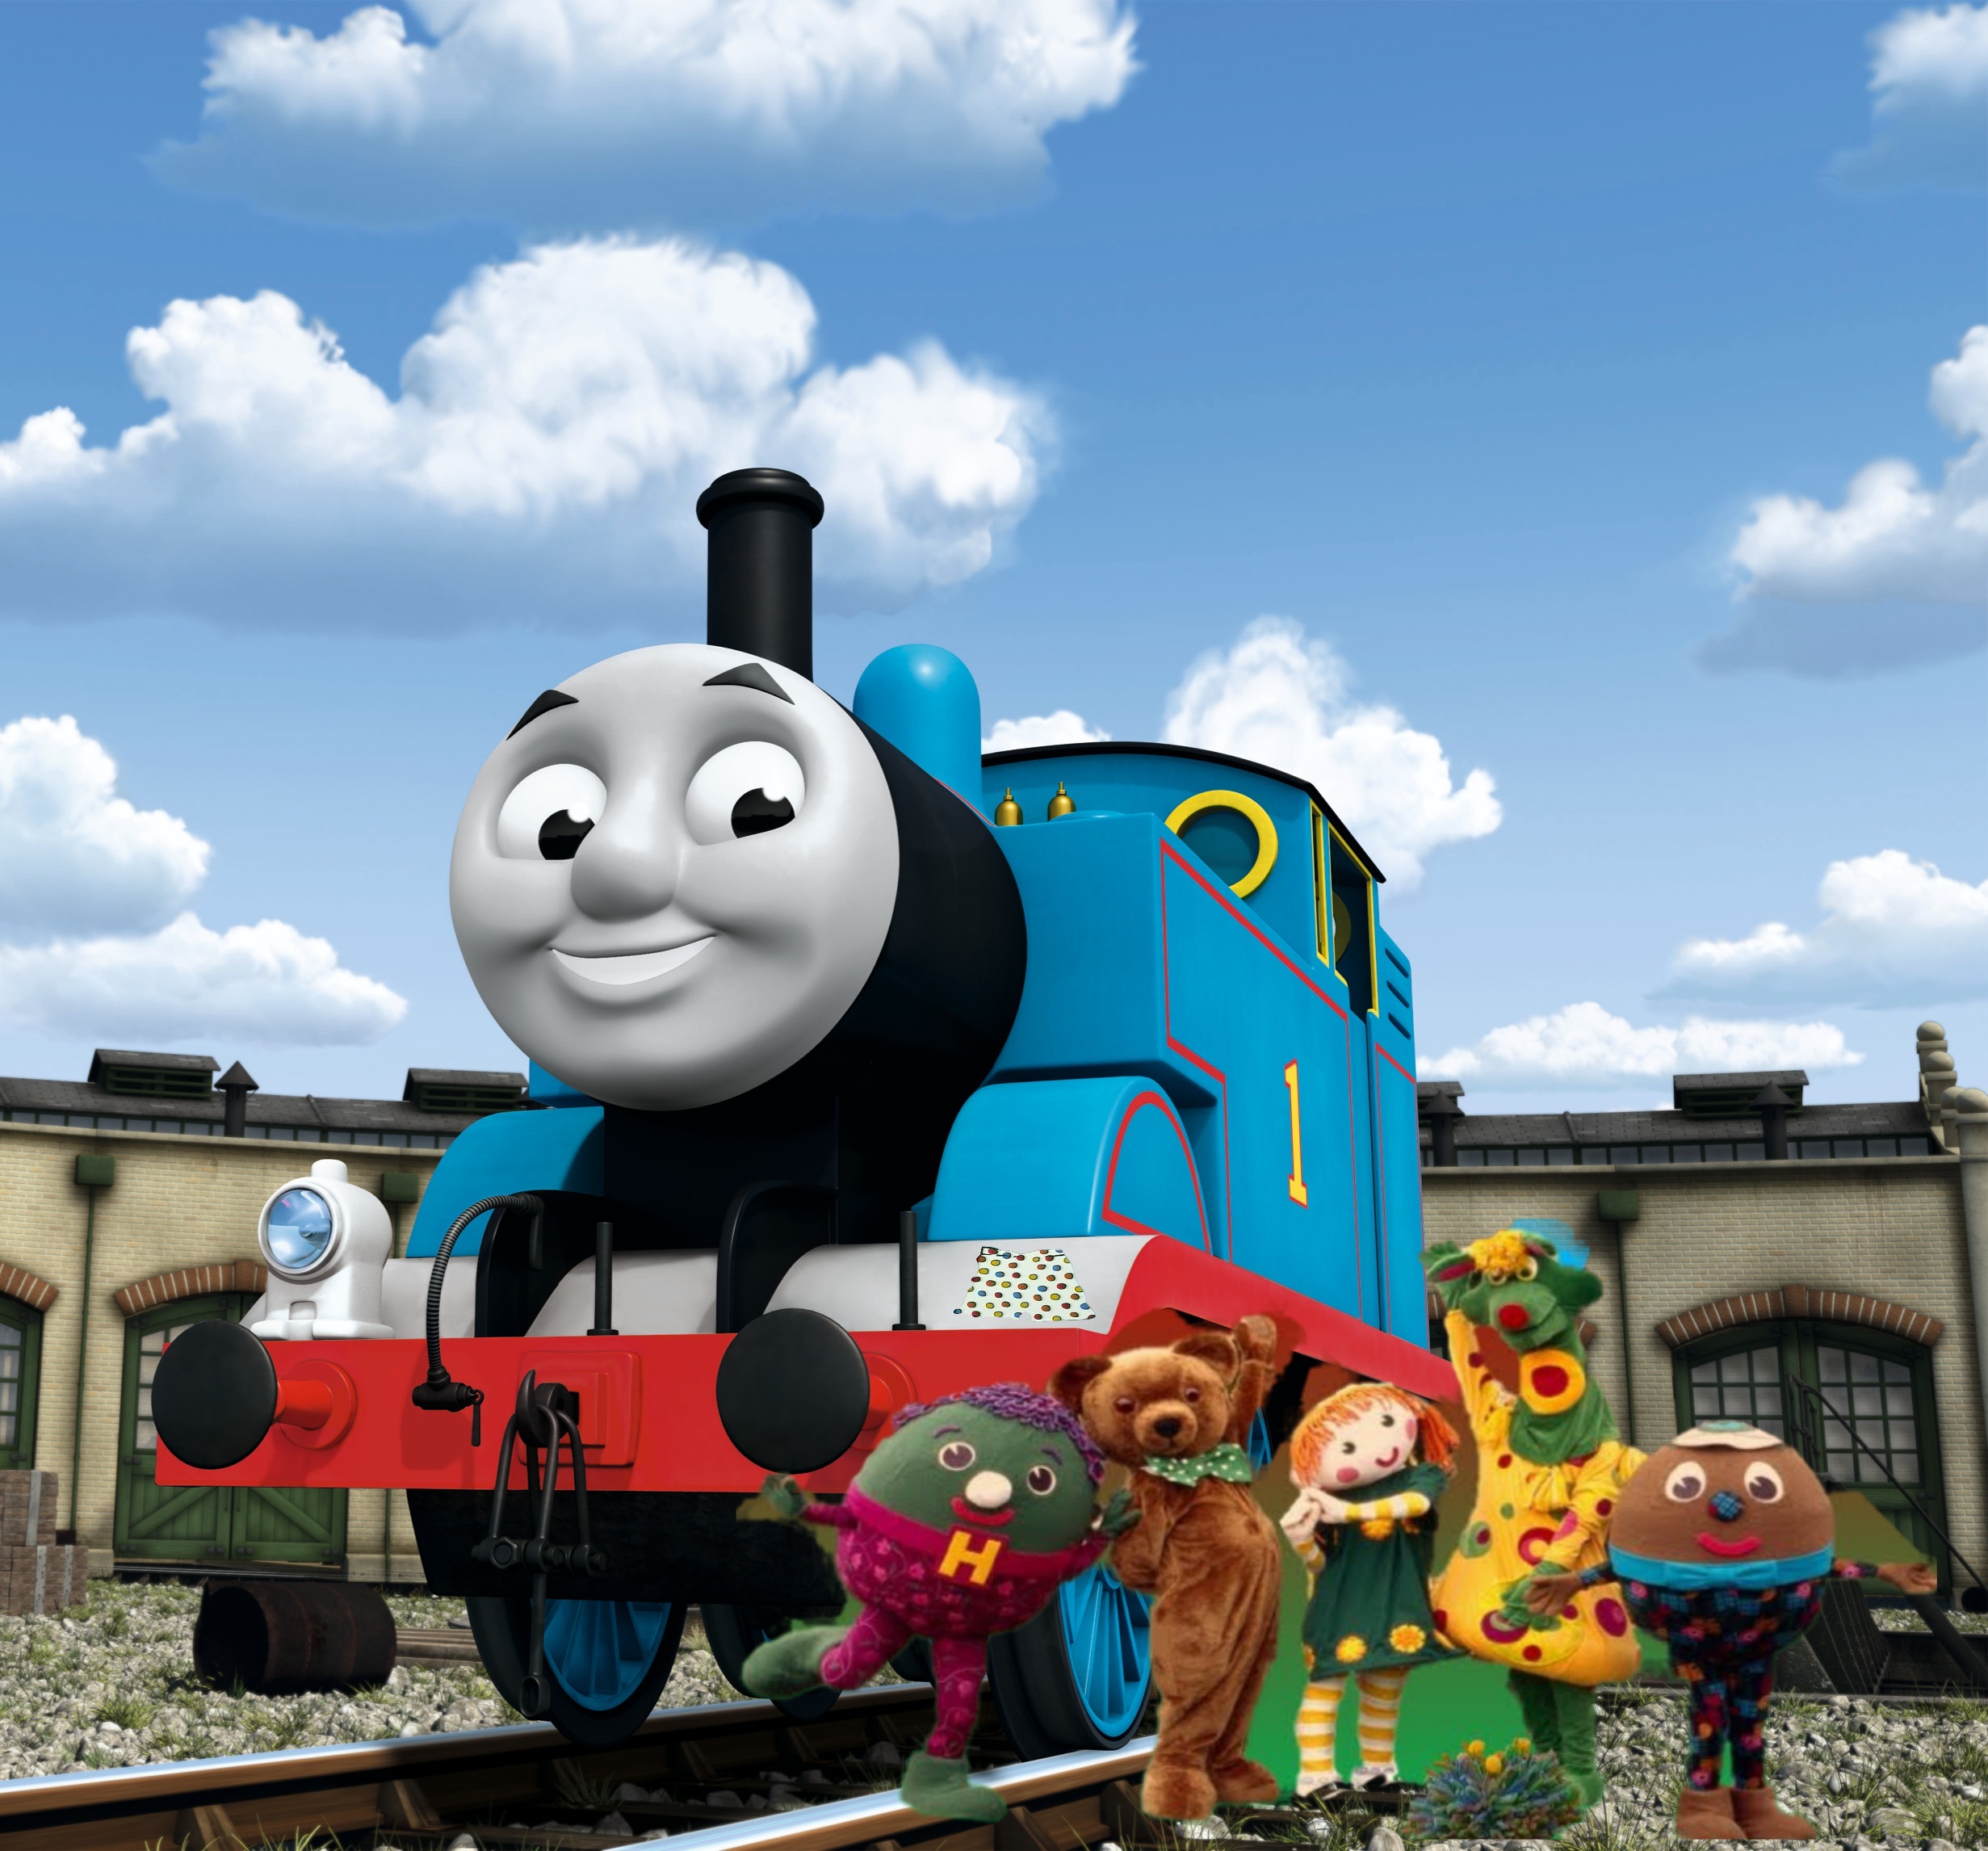 Thomas the Tank Engine meets Polkaroo and his Pals by Trainzville